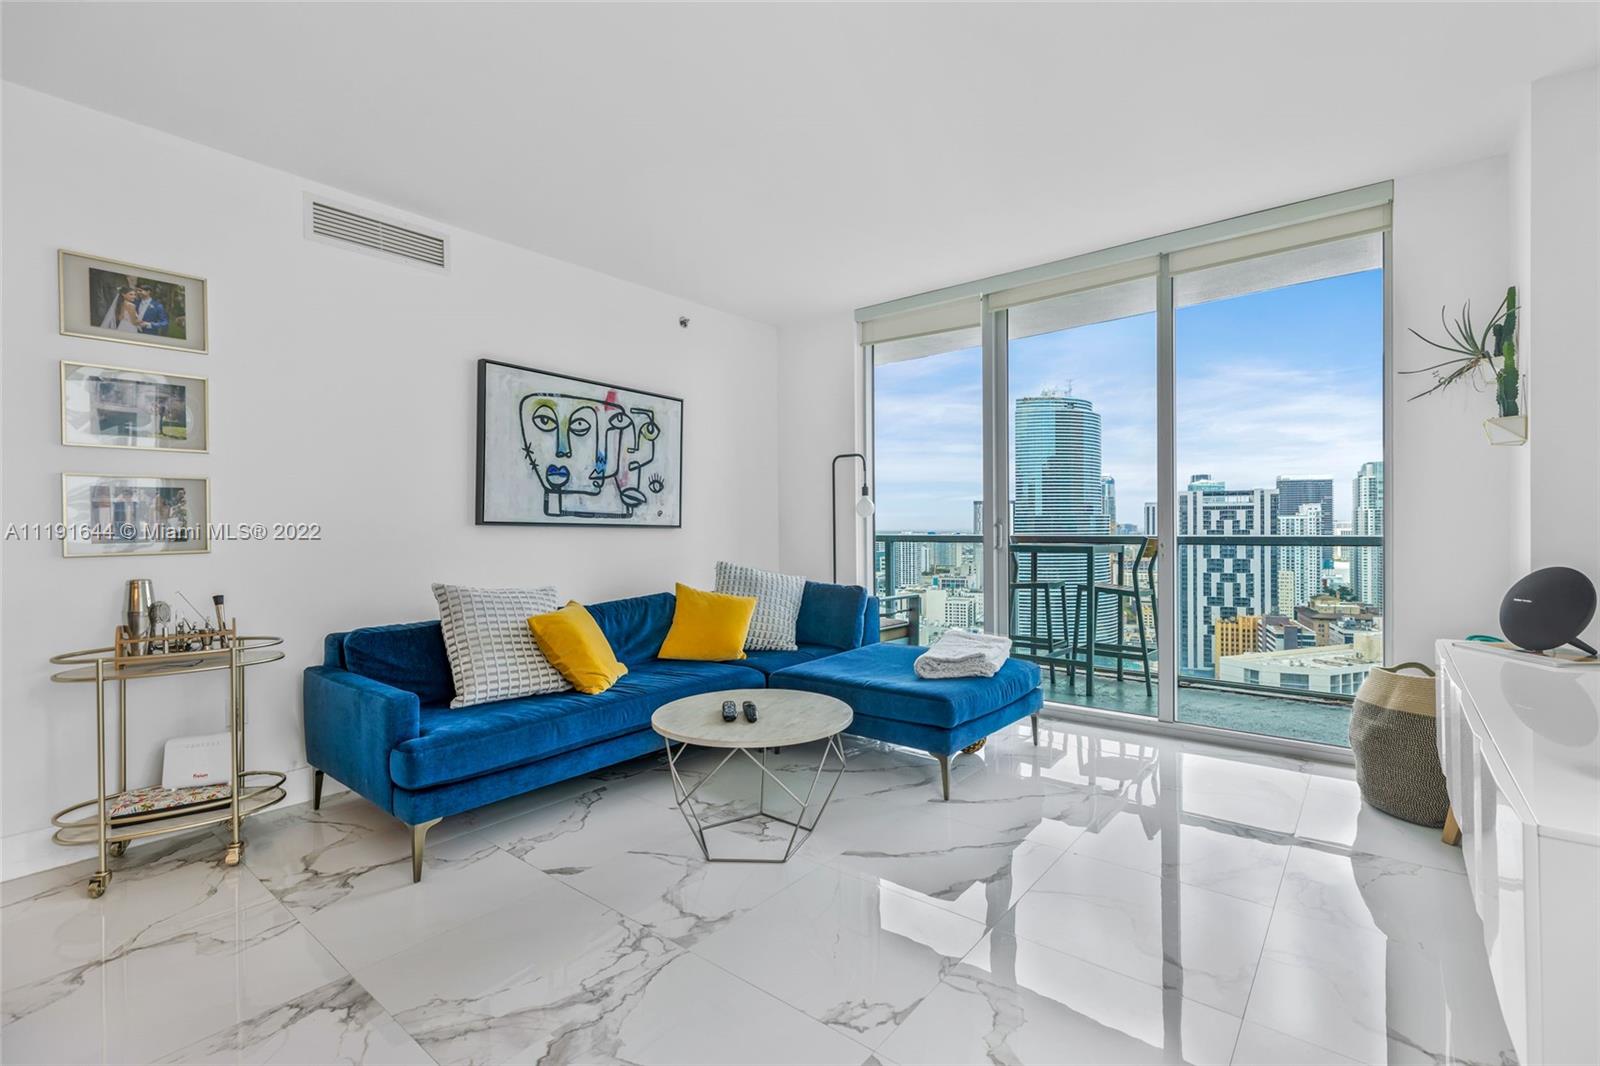 2BD/2BA residence with spectacular river and ocean views. This corner unit has an abundance of natural light, top of the line stainless steel appliances, new washer/dryer, new AC, built-in closets, porcelain marble-like floors, blackout shades, a large balcony, and an ample amount of storage. 5-star amenities, 2 pools including a rooftop pool overlooking the Bay, gym, sauna, hot tub, games room, theater, party room, and movie room.
Located in the heart of Brickell. Available fully furnished. One parking spot on the 4th level and bike storage included.